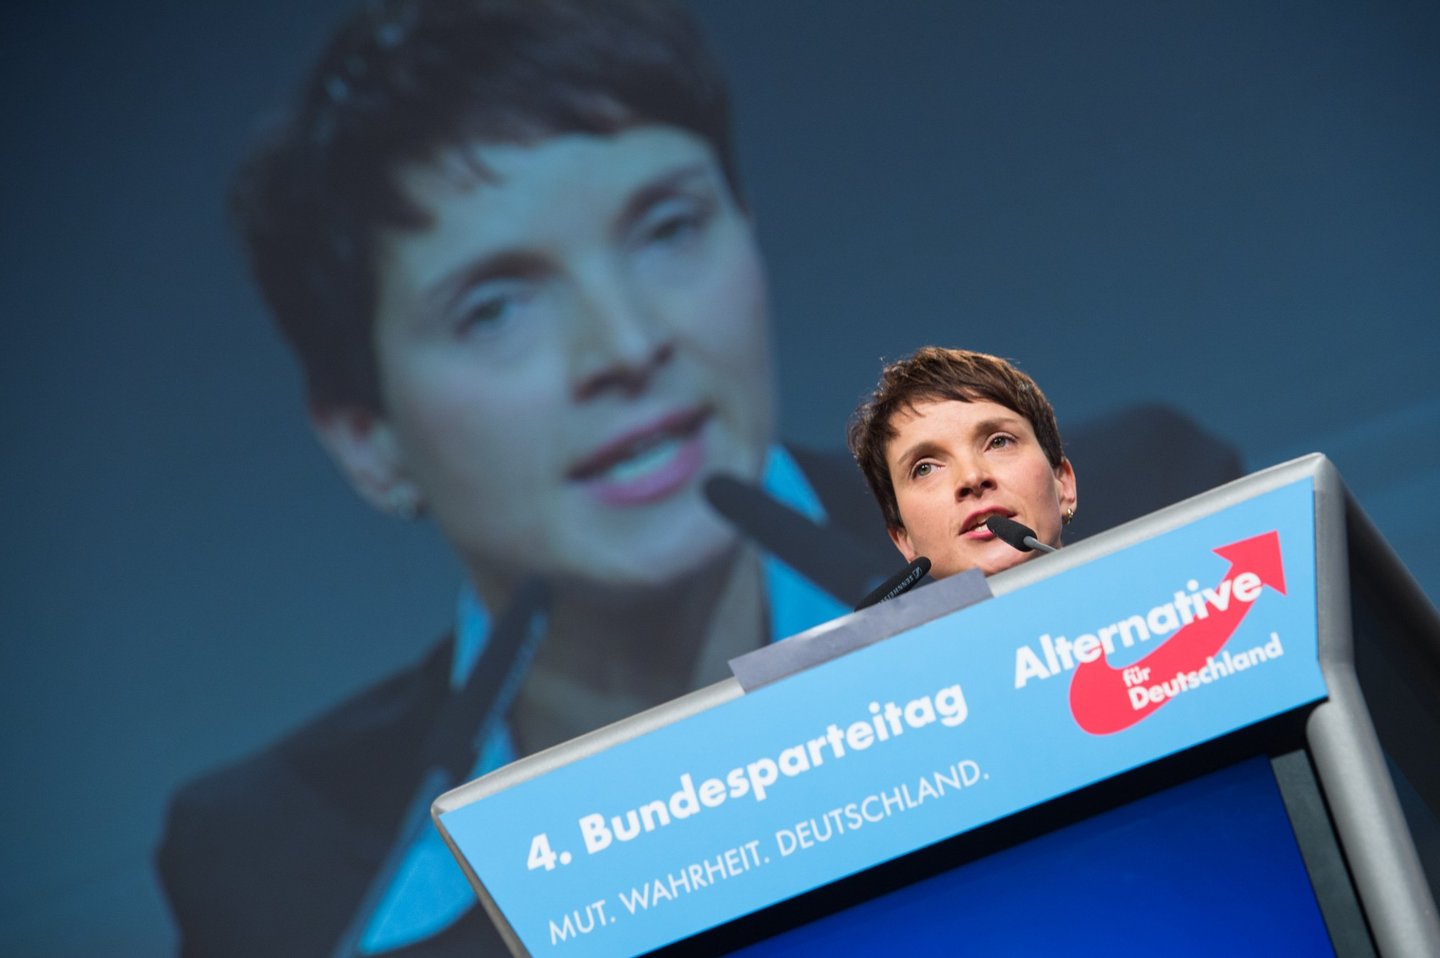 HANOVER, GERMANY - NOVEMBER 28: Chairwoman Frauke Petry delivers her speech during the AfD (Alternative fuer Deutschland) federal party congress on November 28, 2015 in Hanover, Germany. The AFD aims to enter three new state parliaments in 2016 by luring conservative voters angry with Chancellor Angela Merkel's open-door asylum policy. This weekend the party will outline its plan to bring order to what it calls the "asylum chaos." (Photo by Nigel Treblin/Getty Images)